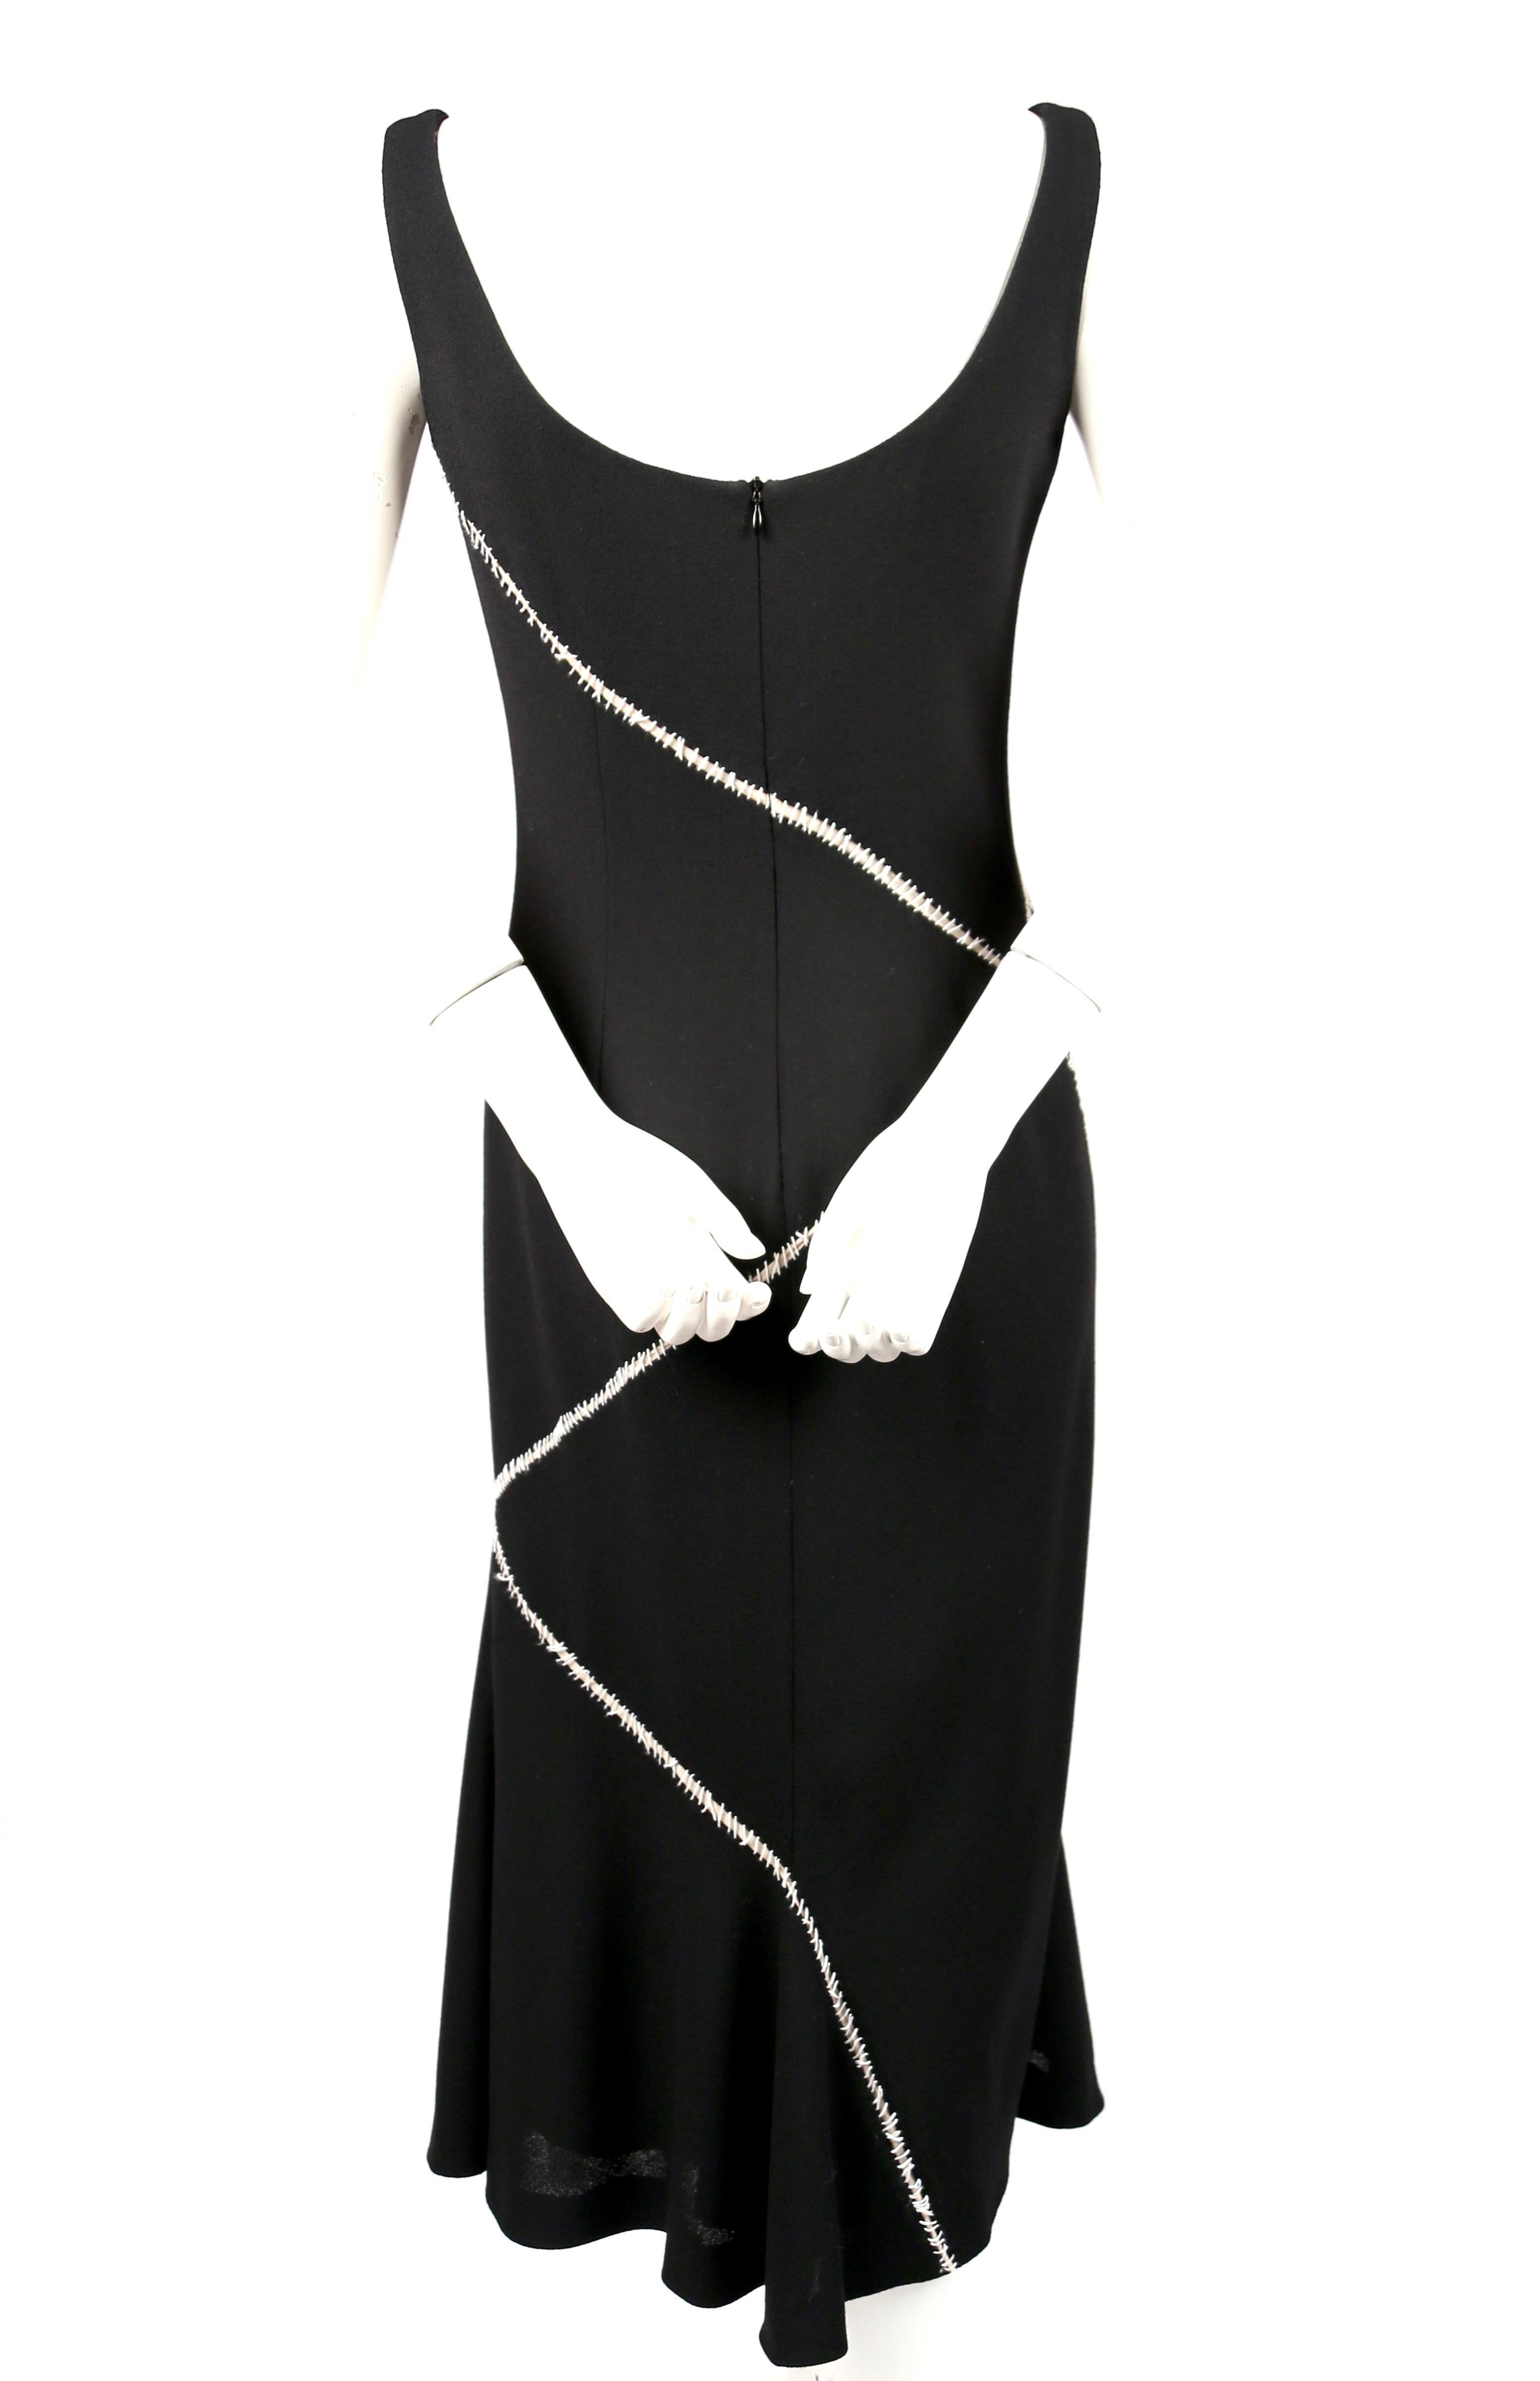 2004 ALEXANDER MCQUEEN black wool dress with white stitching  For Sale 2